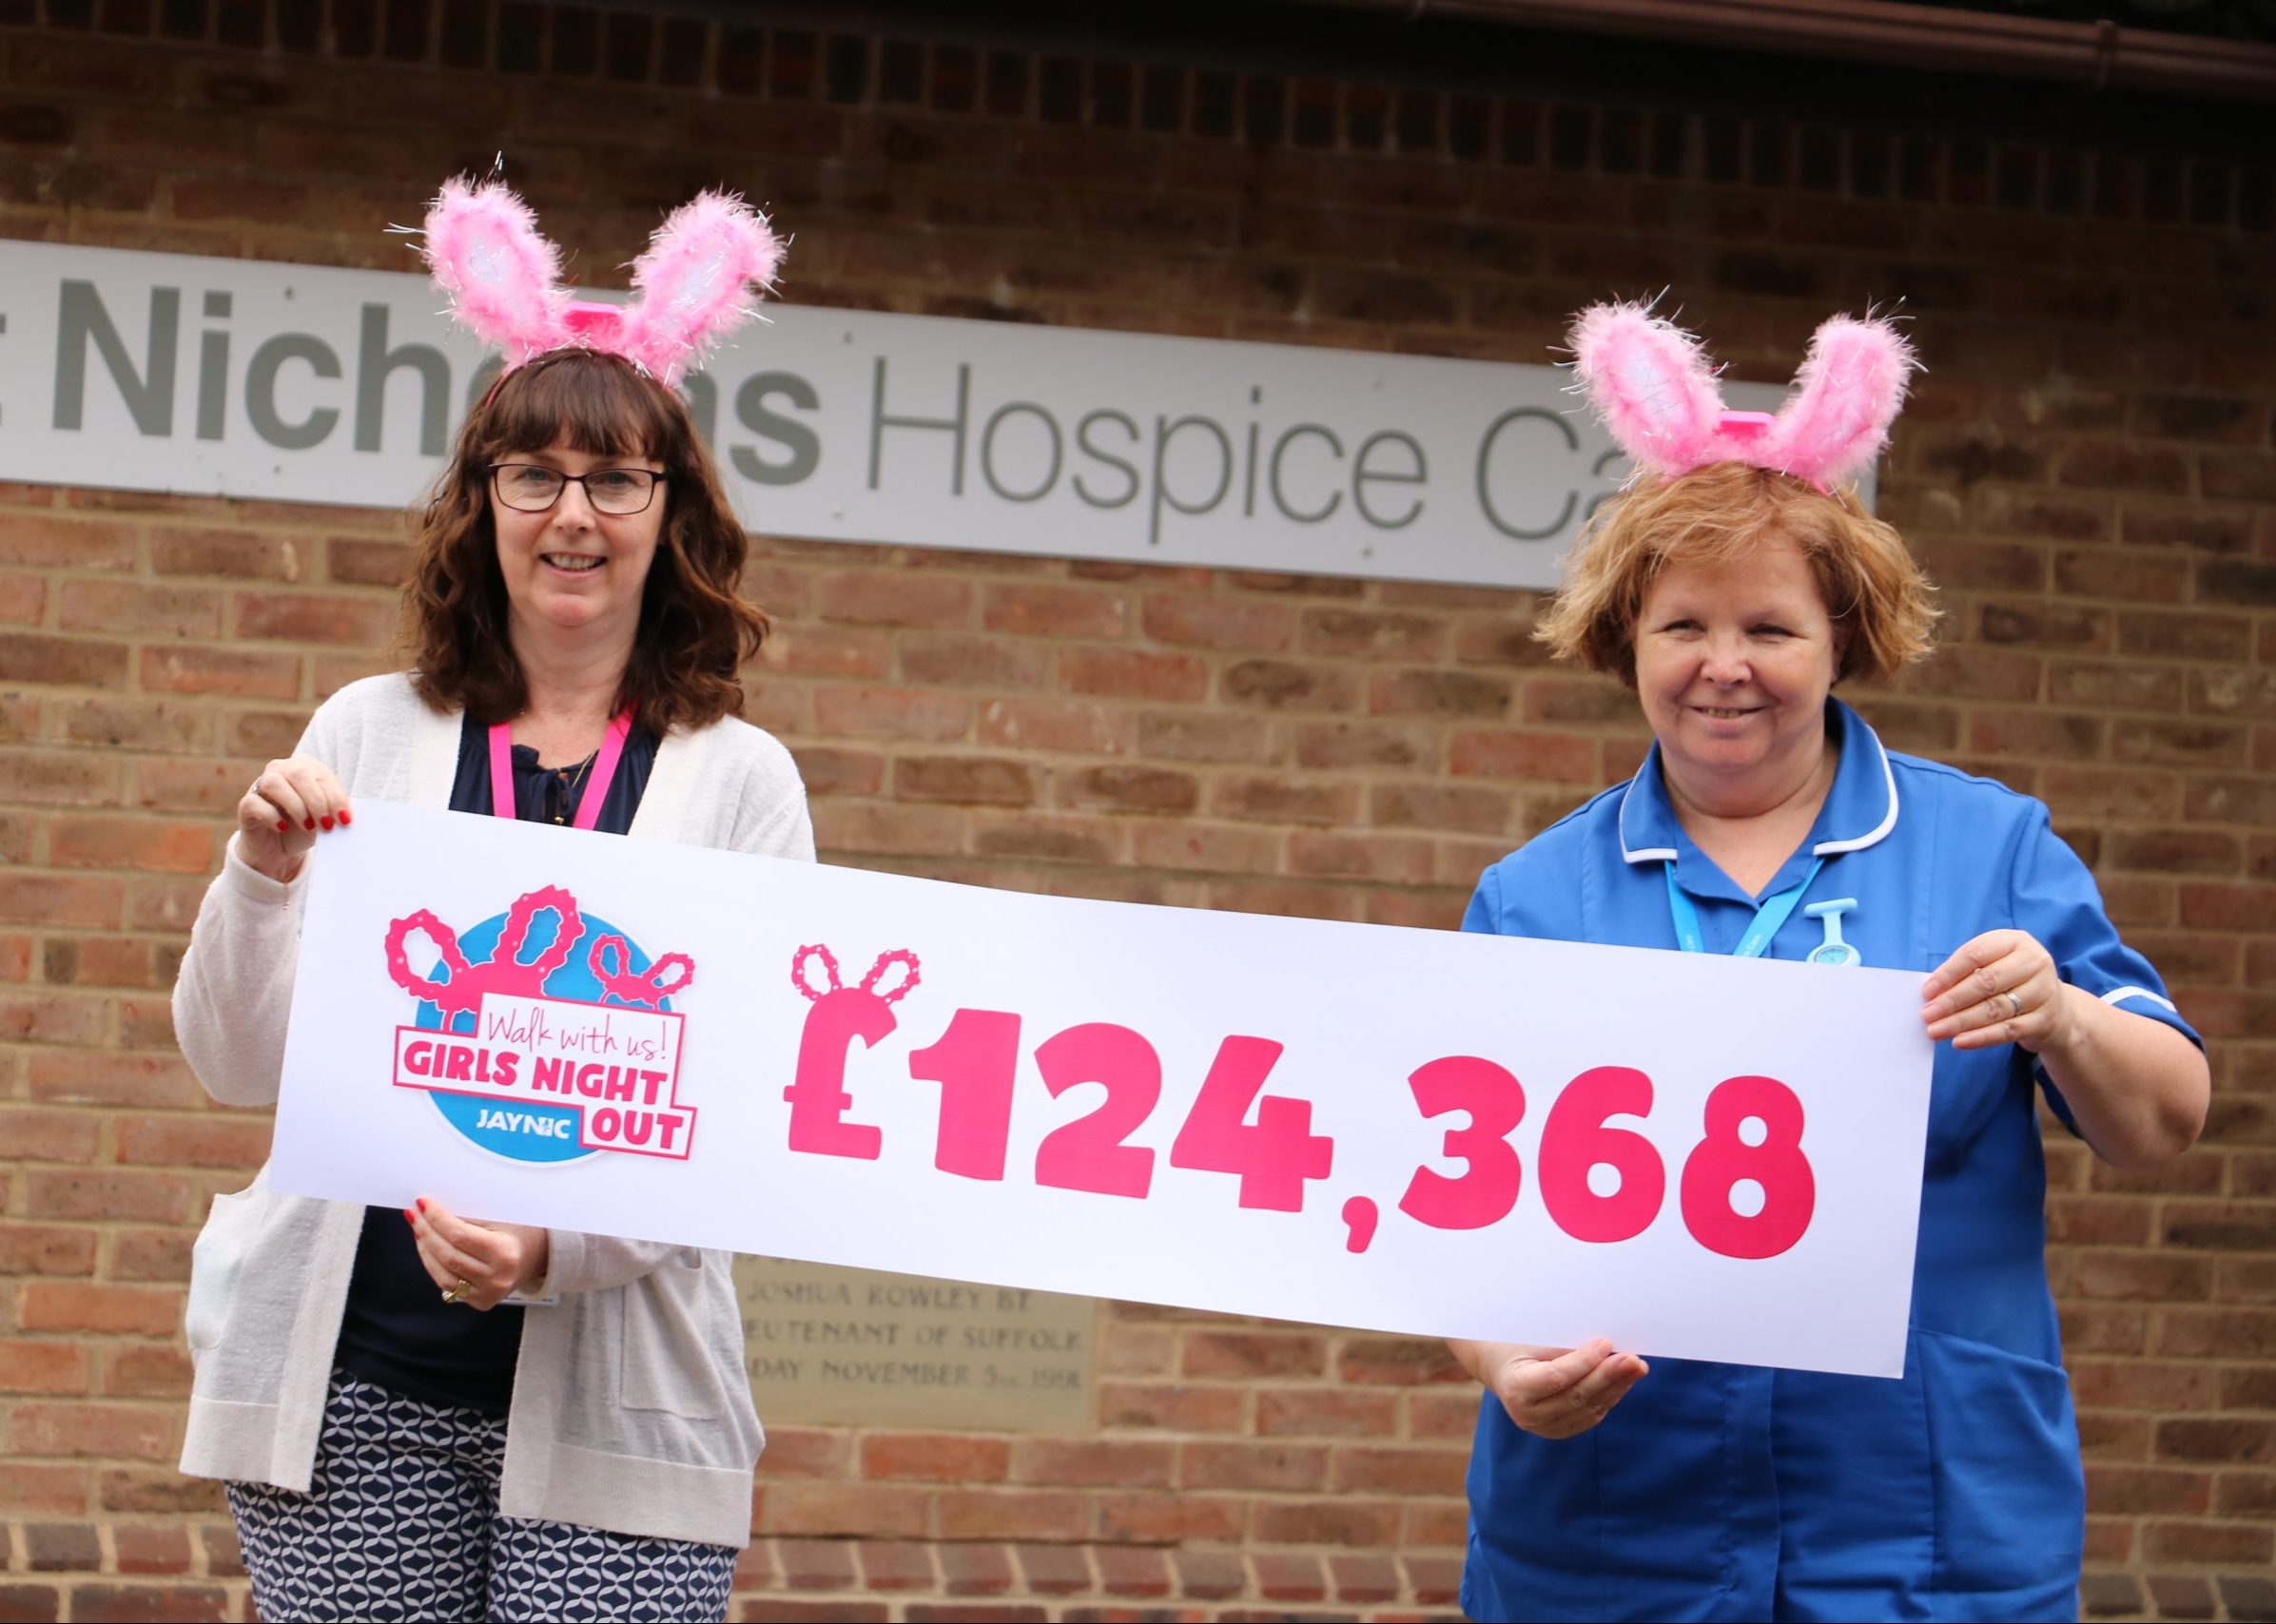 clinical team holding total banner for £124,368